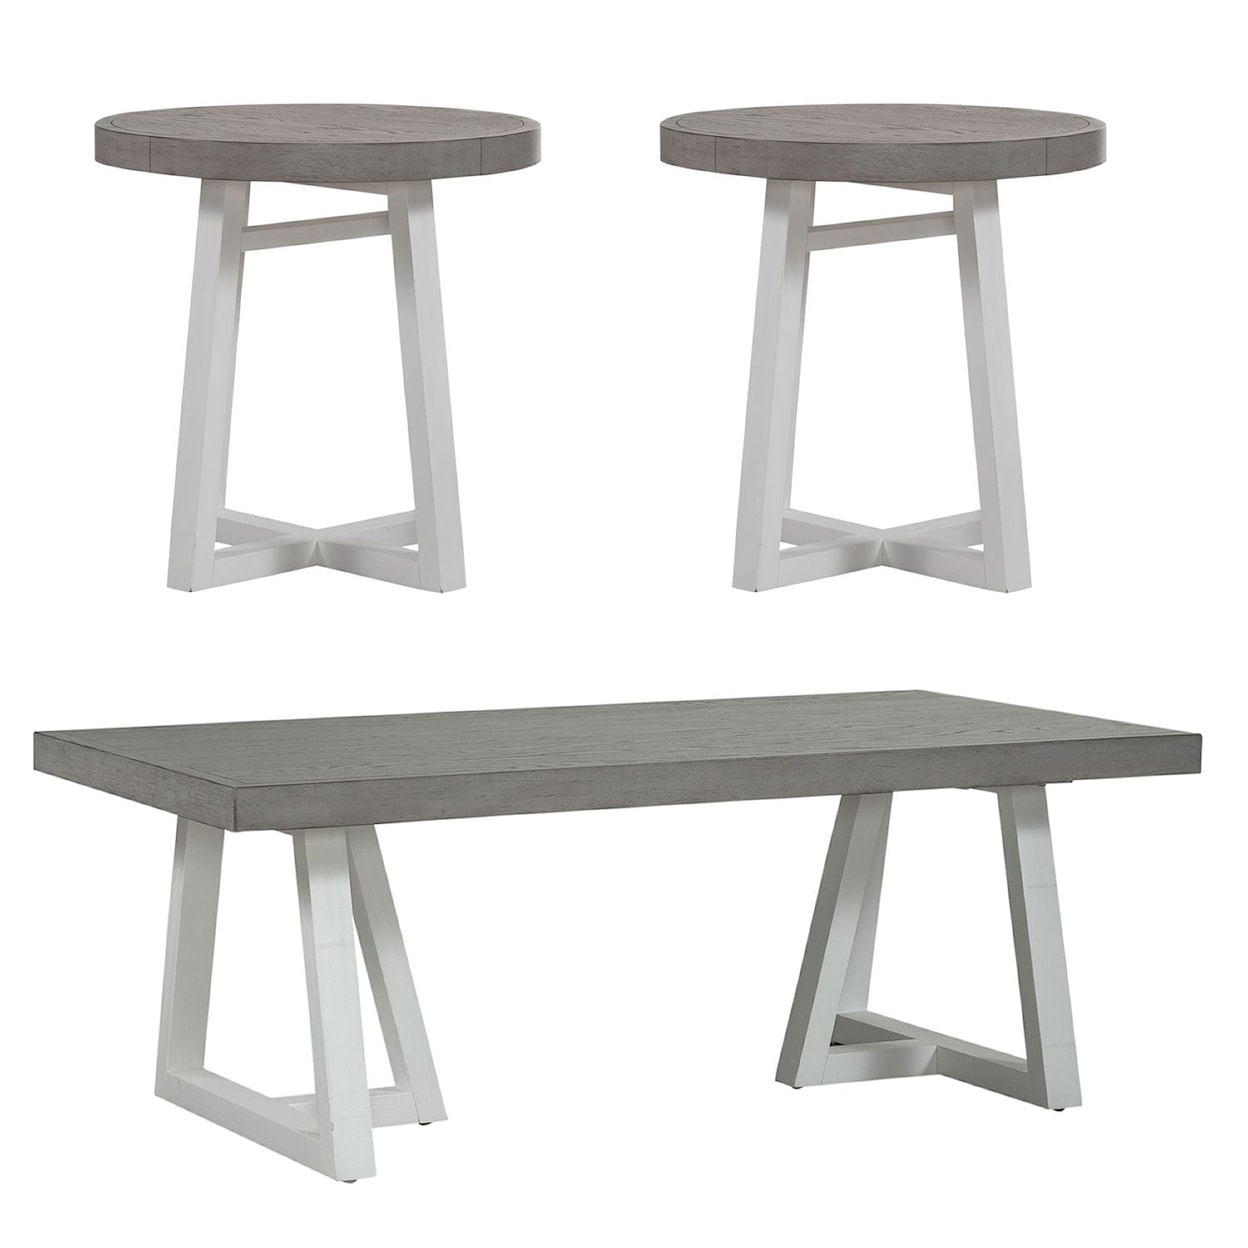 Libby Palmetto Heights 3-Piece Occasional Table Set